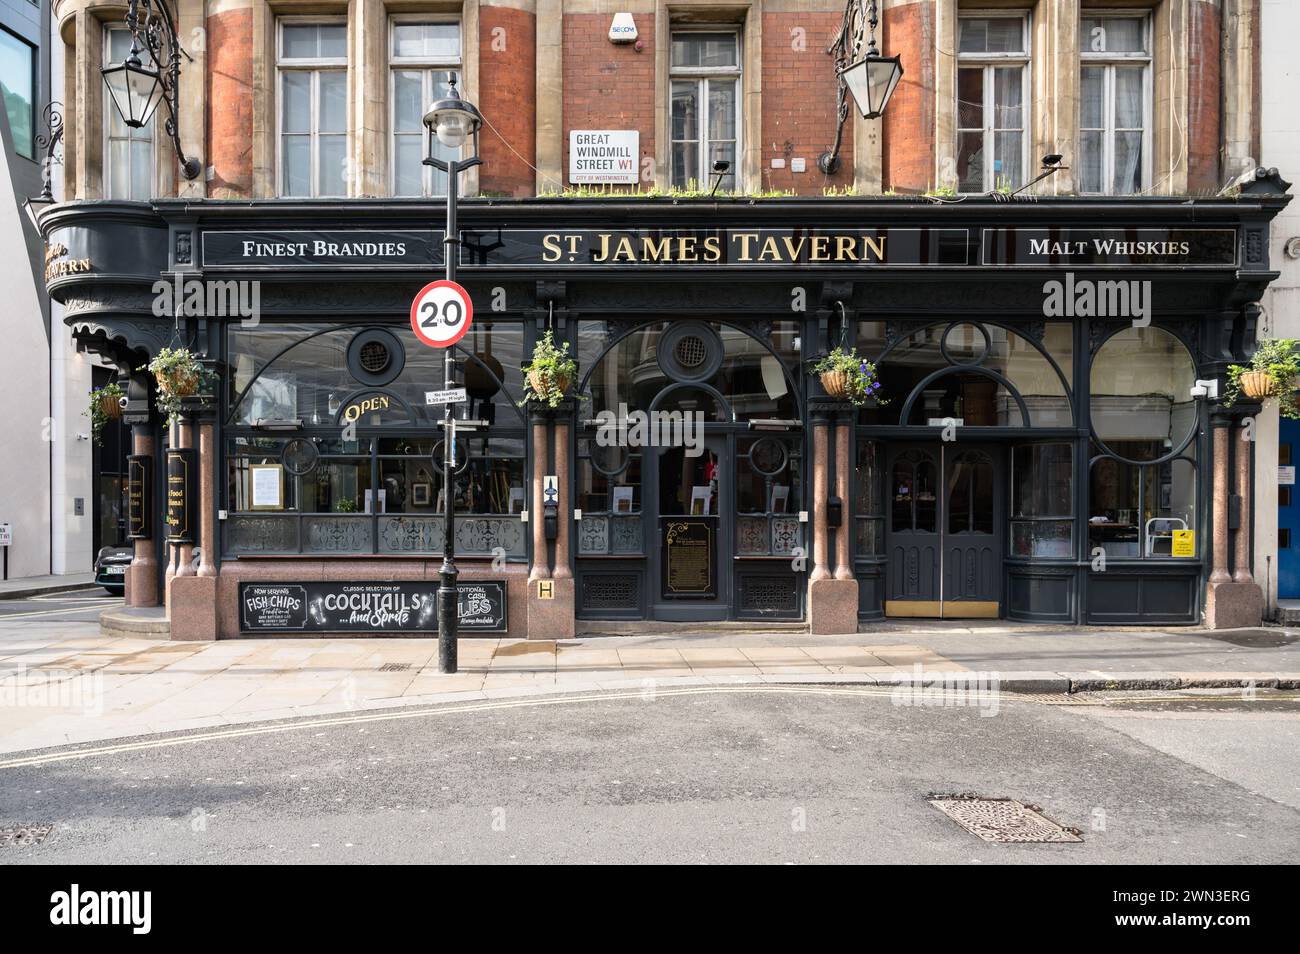 St James Tavern, a traditional pub at the corner of Great Windmill Street and Denman Street Soho London UK Stock Photo